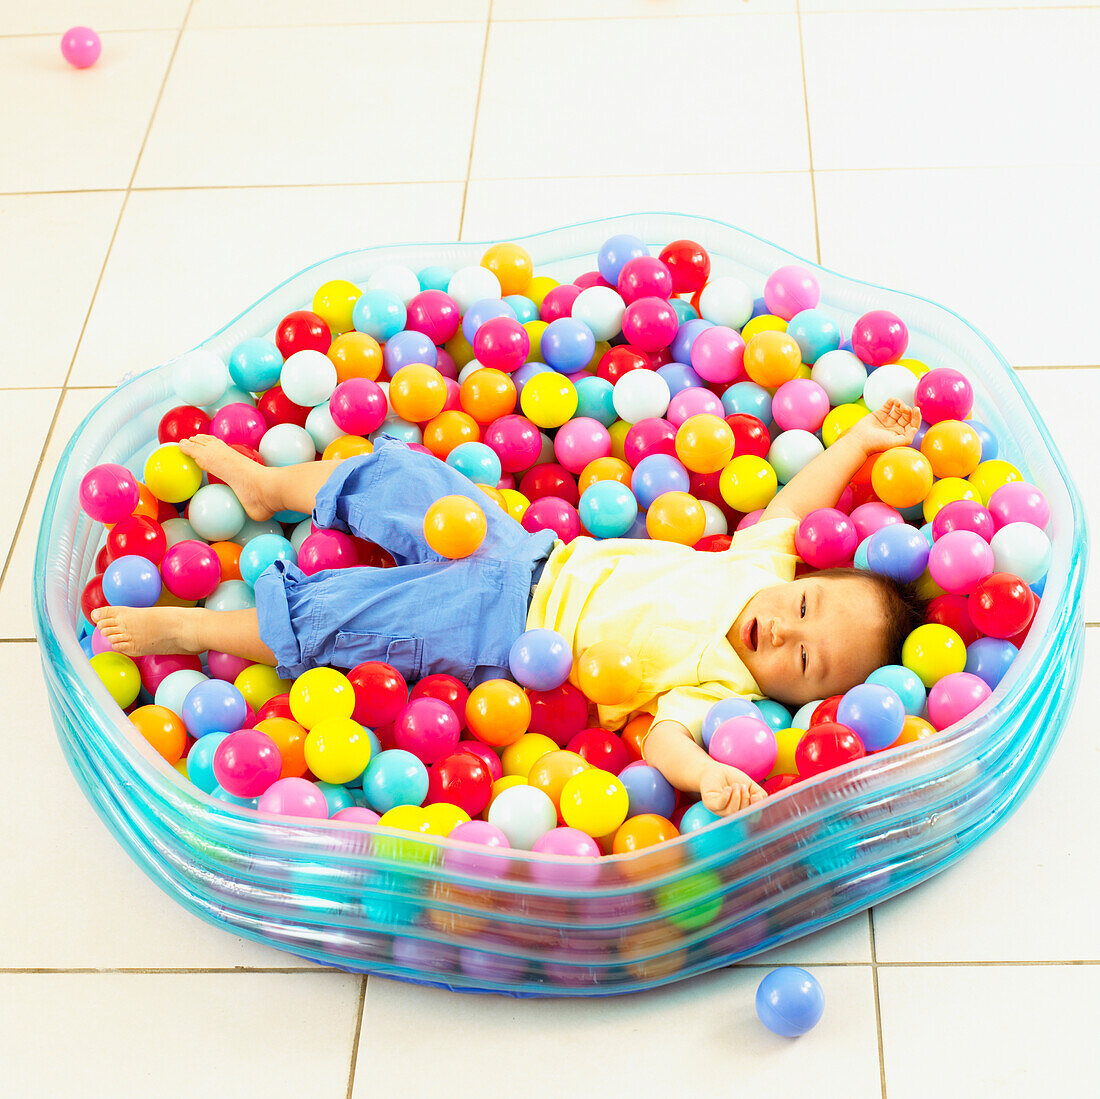 Boy amongst balls held in a large plastic swimming pool